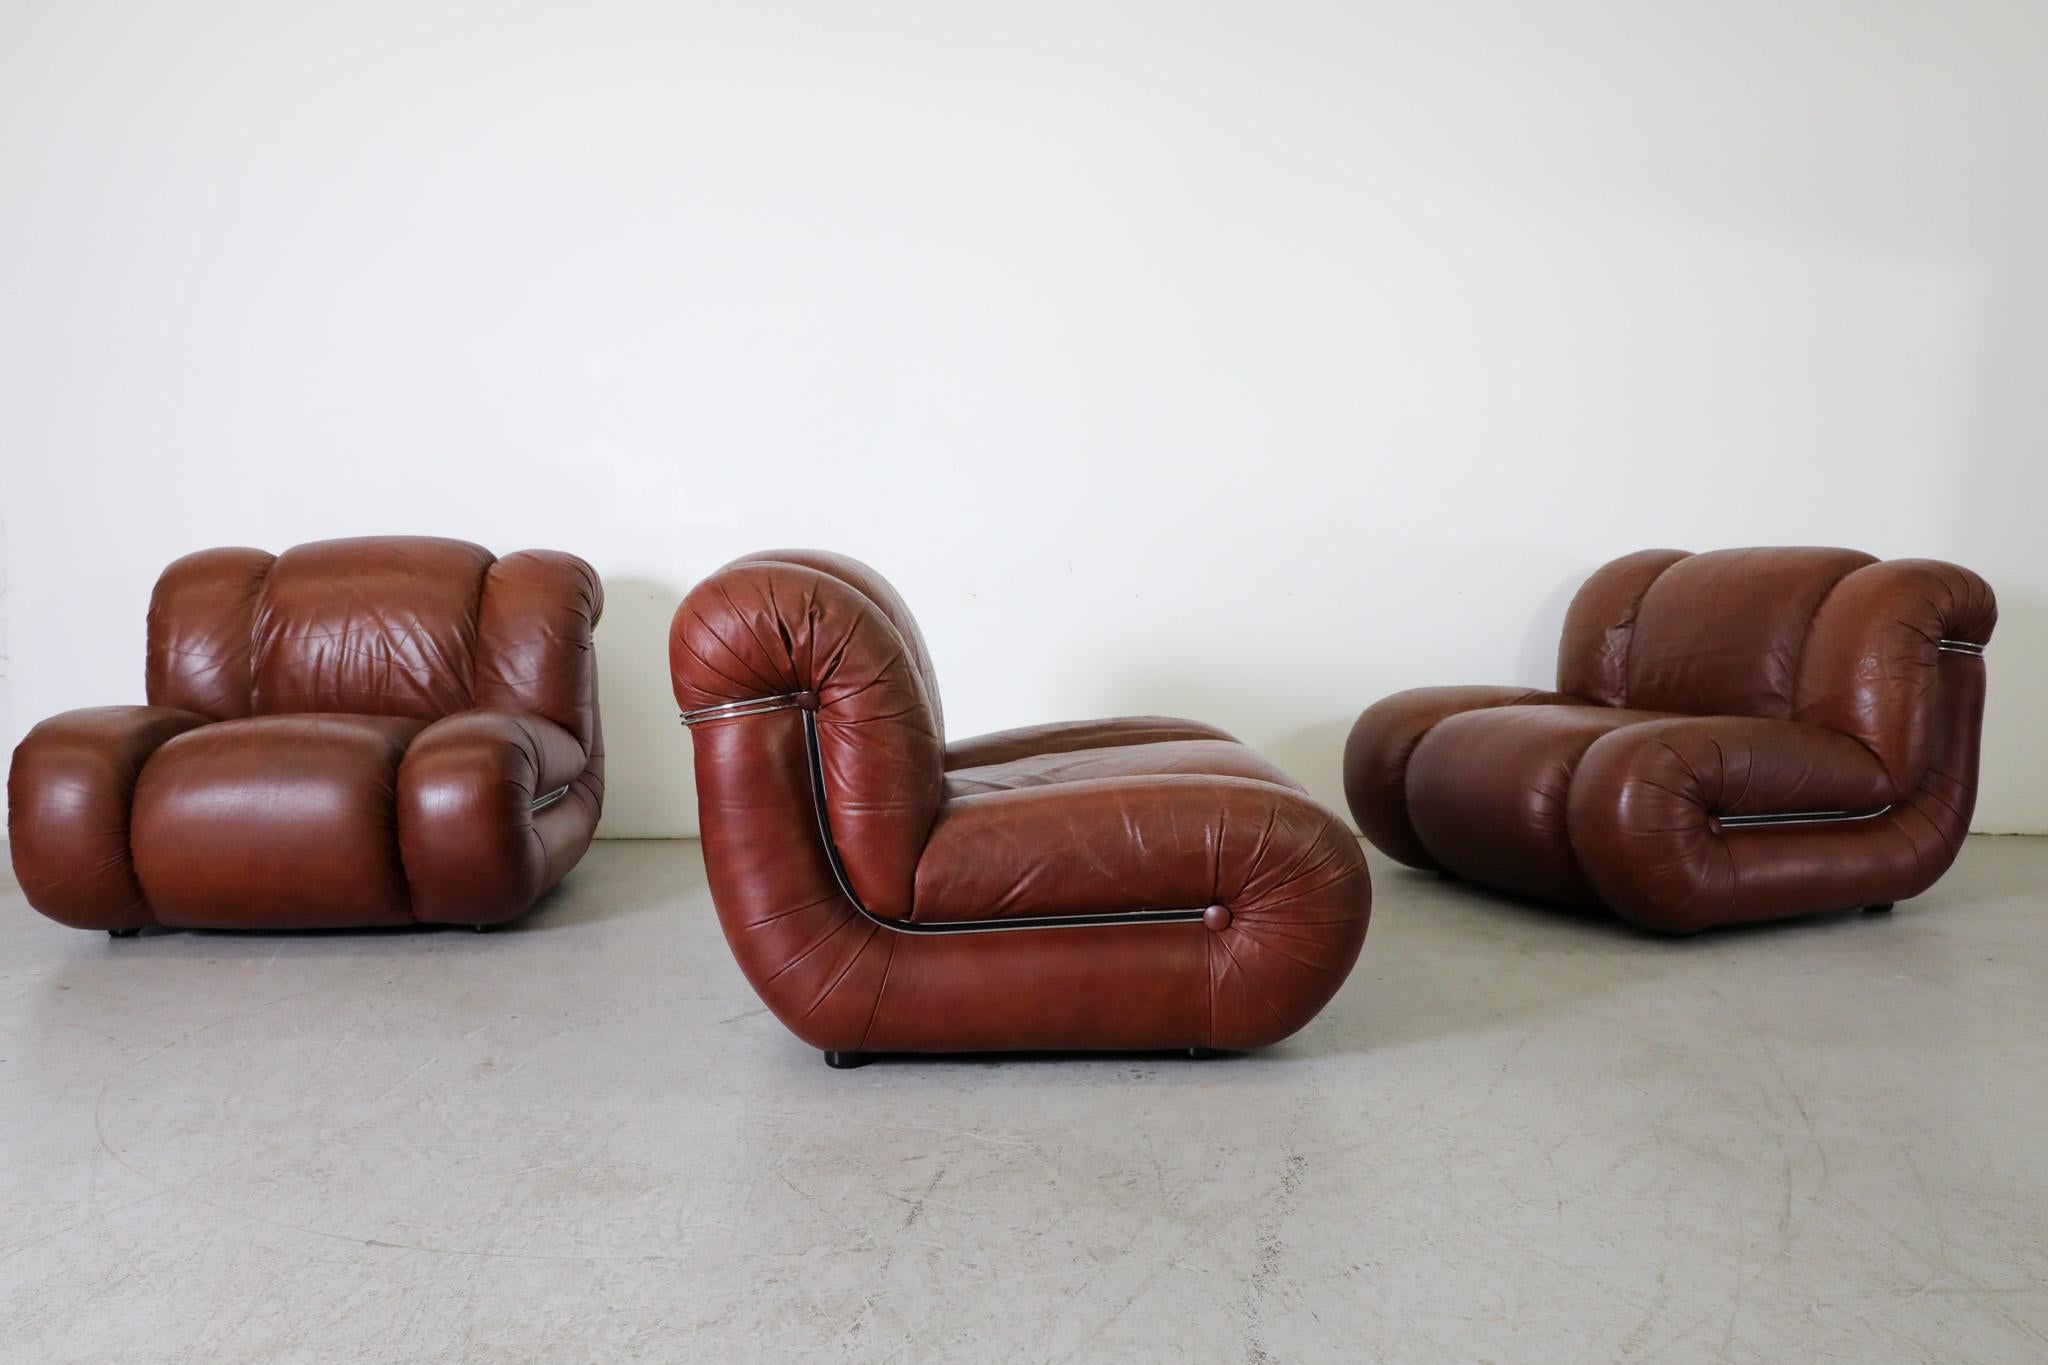 Mimo Padova Velasquez Modular Sofa In Brown Leather And Chrome, Italy 1970s For Sale 6